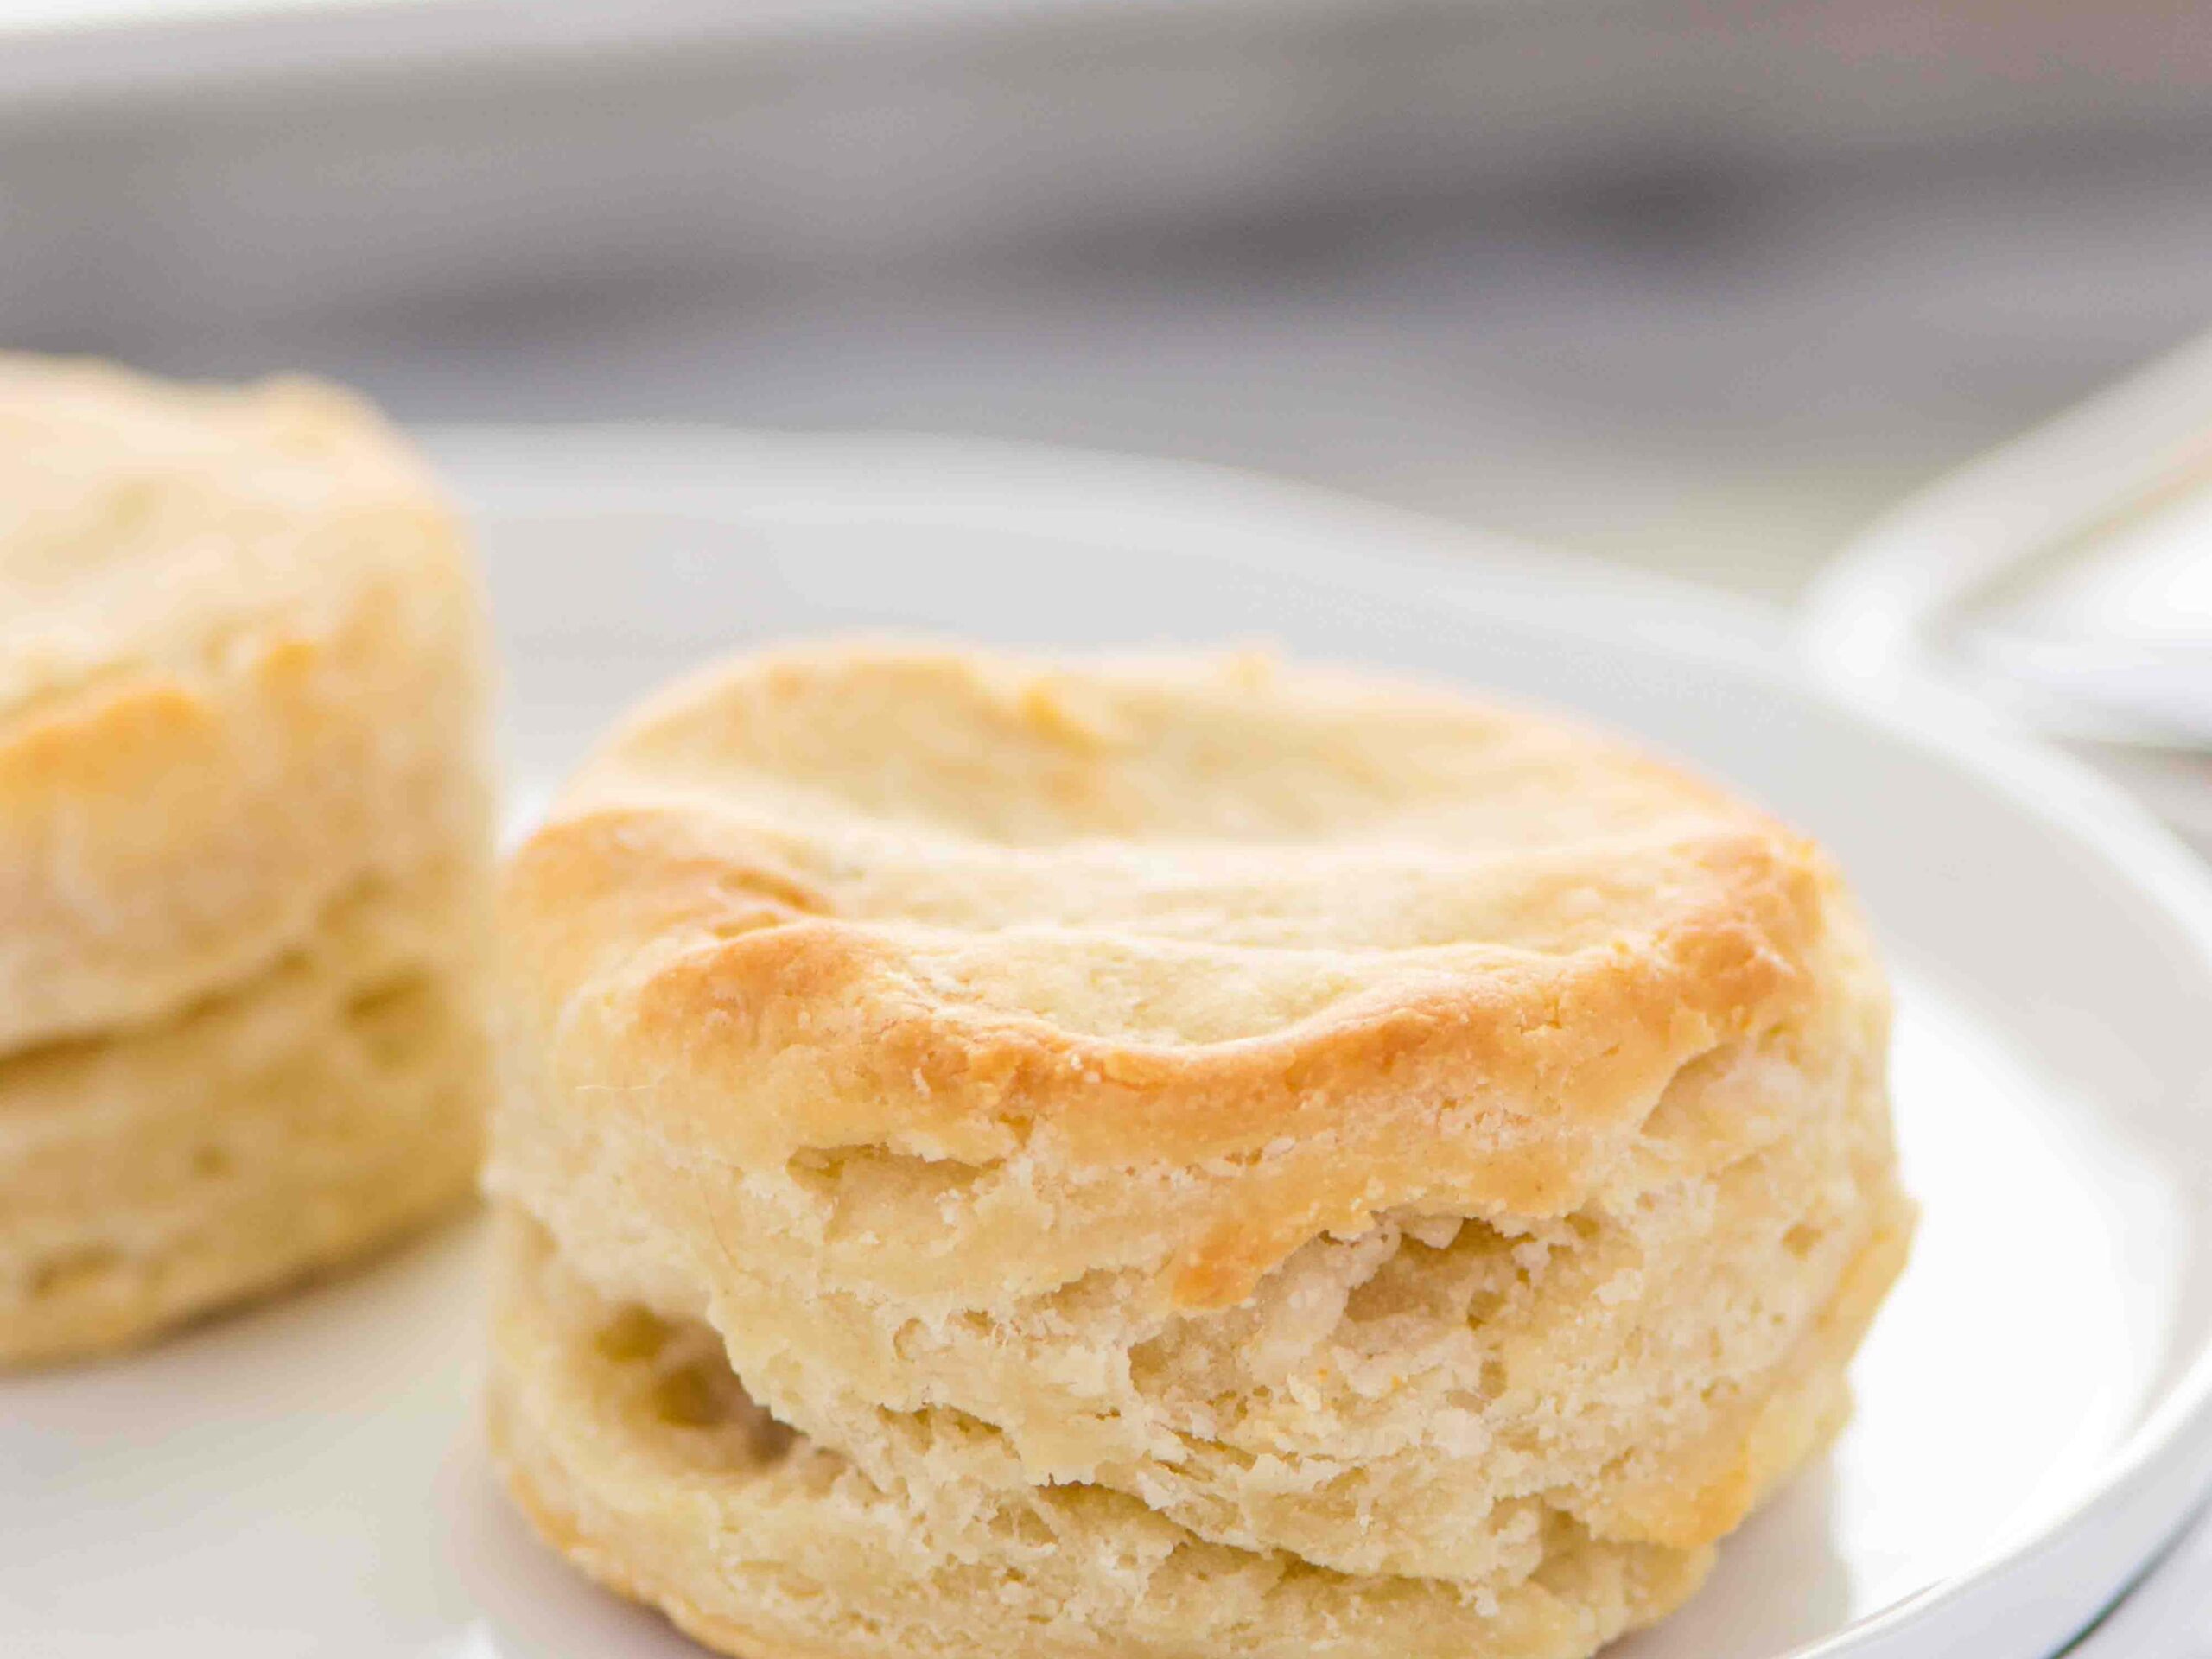  There's nothing like homemade biscuits straight out of the oven.